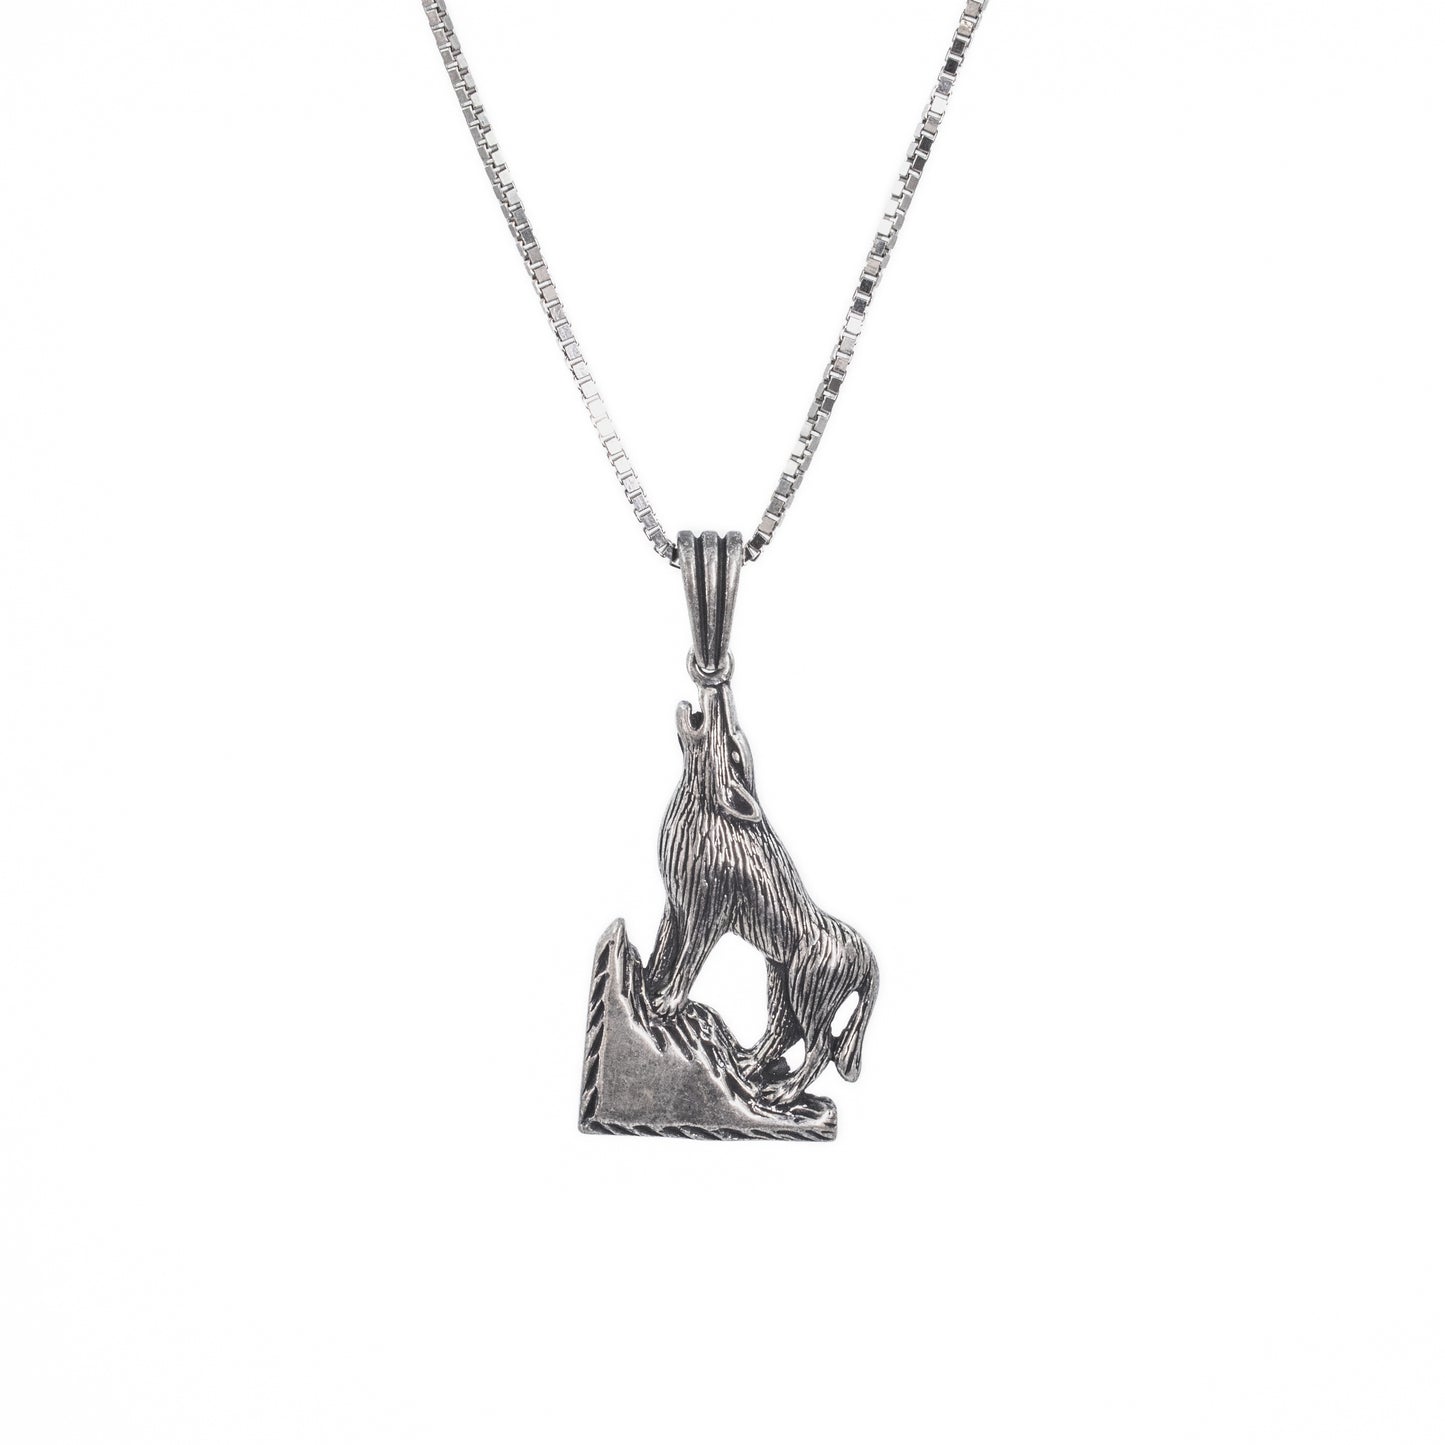 Silver Howling Wolf Pendant